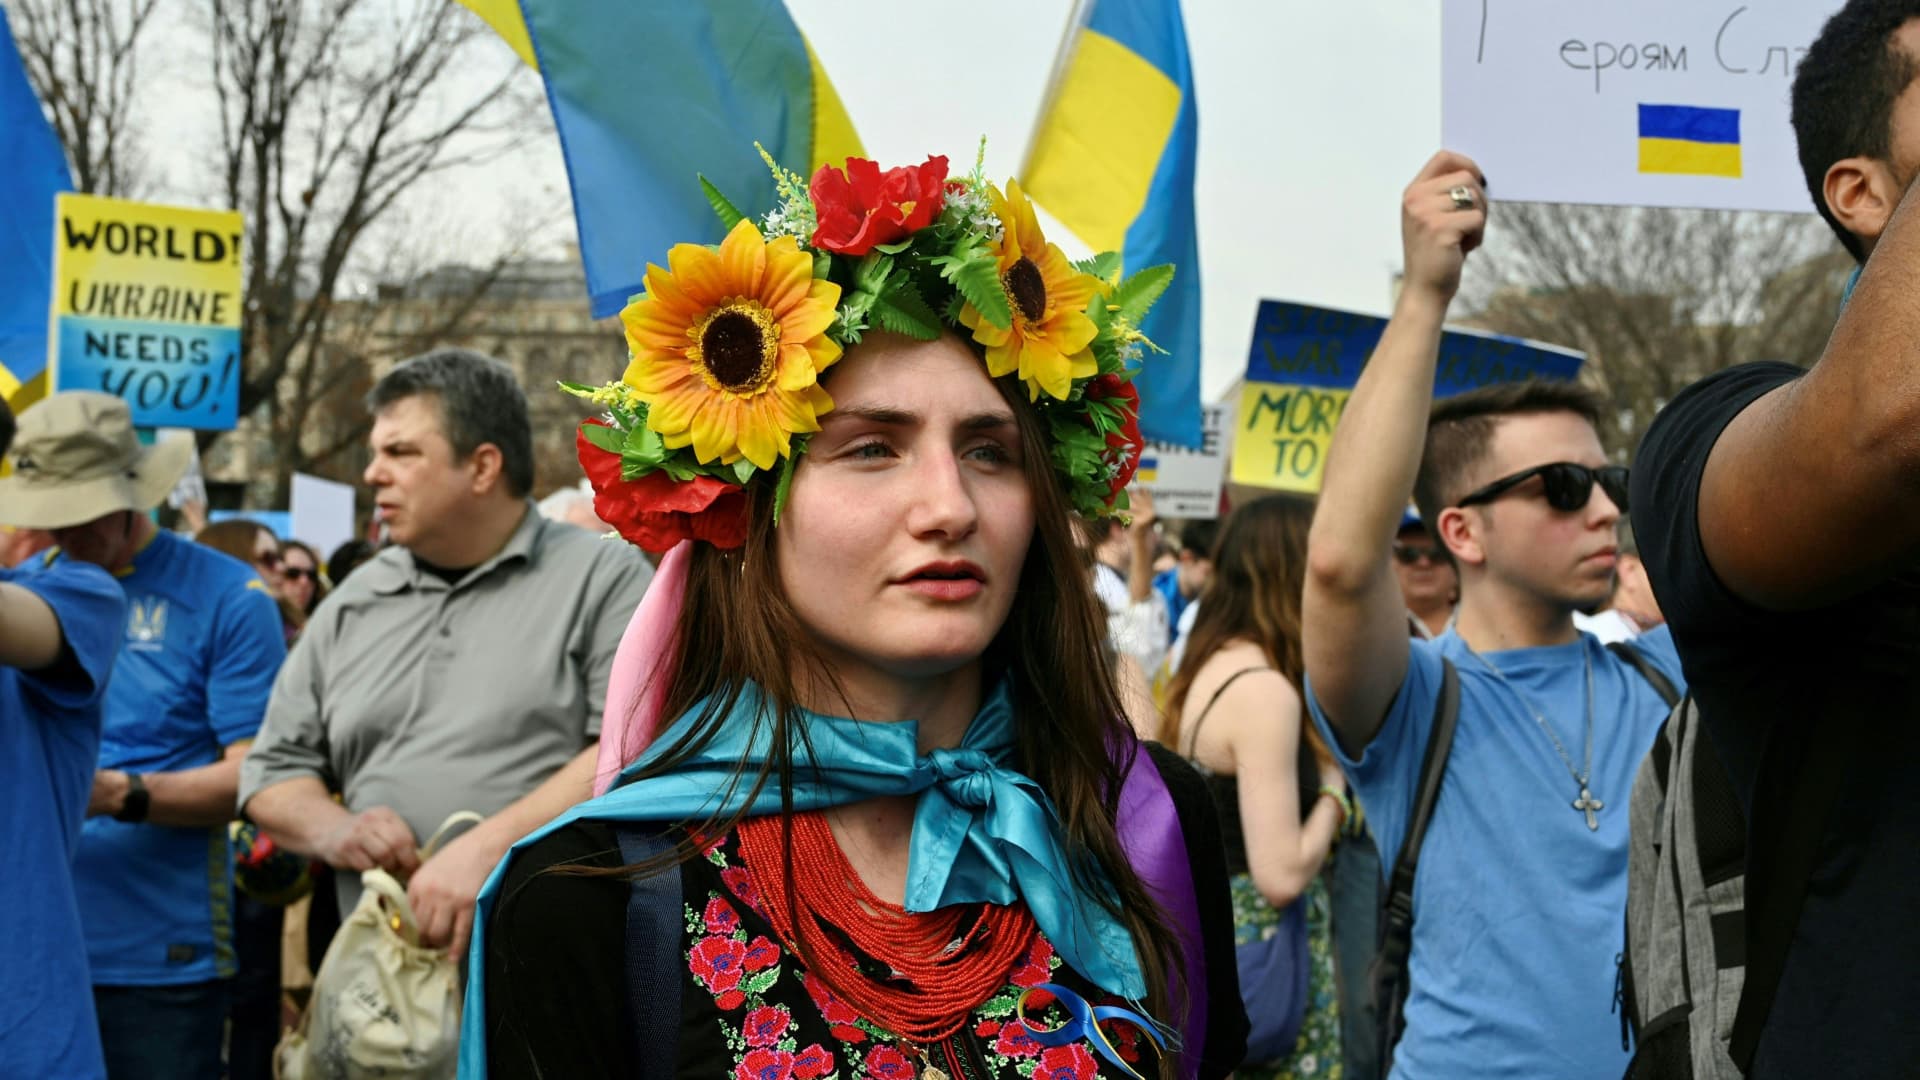 Participants attend a rally protesting the Russian invasion of Ukraine at Lafayette Square across the White House in Washington, DC, on March 6, 2022.